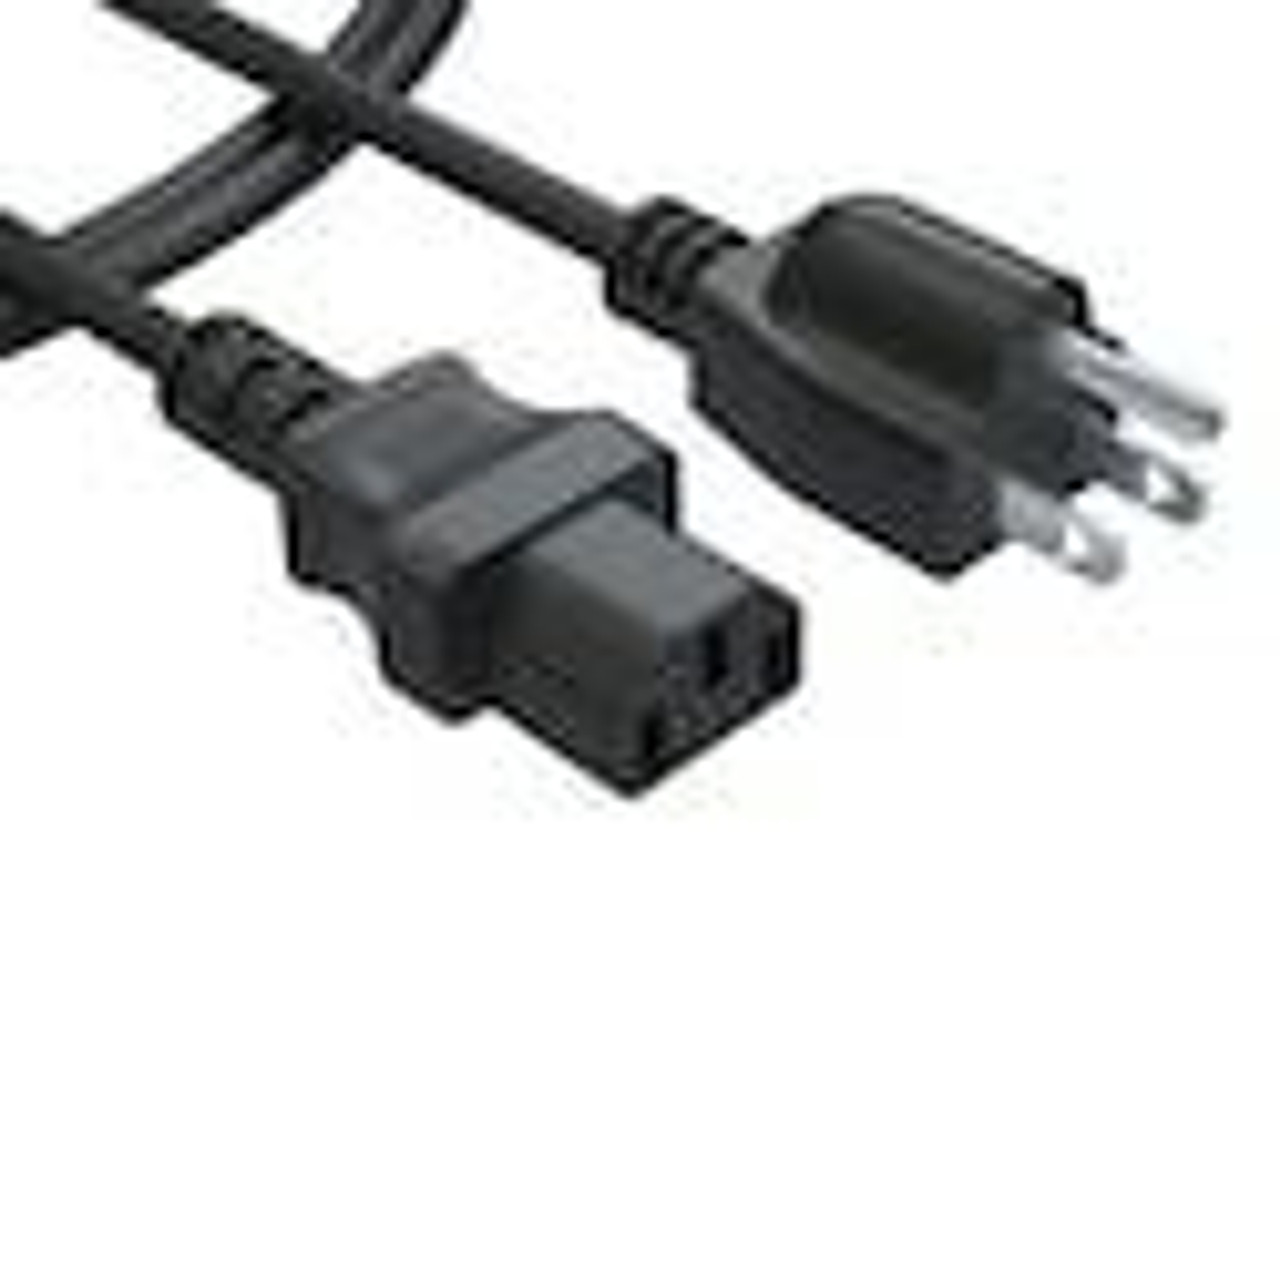 Grounded Ballast Power Cords